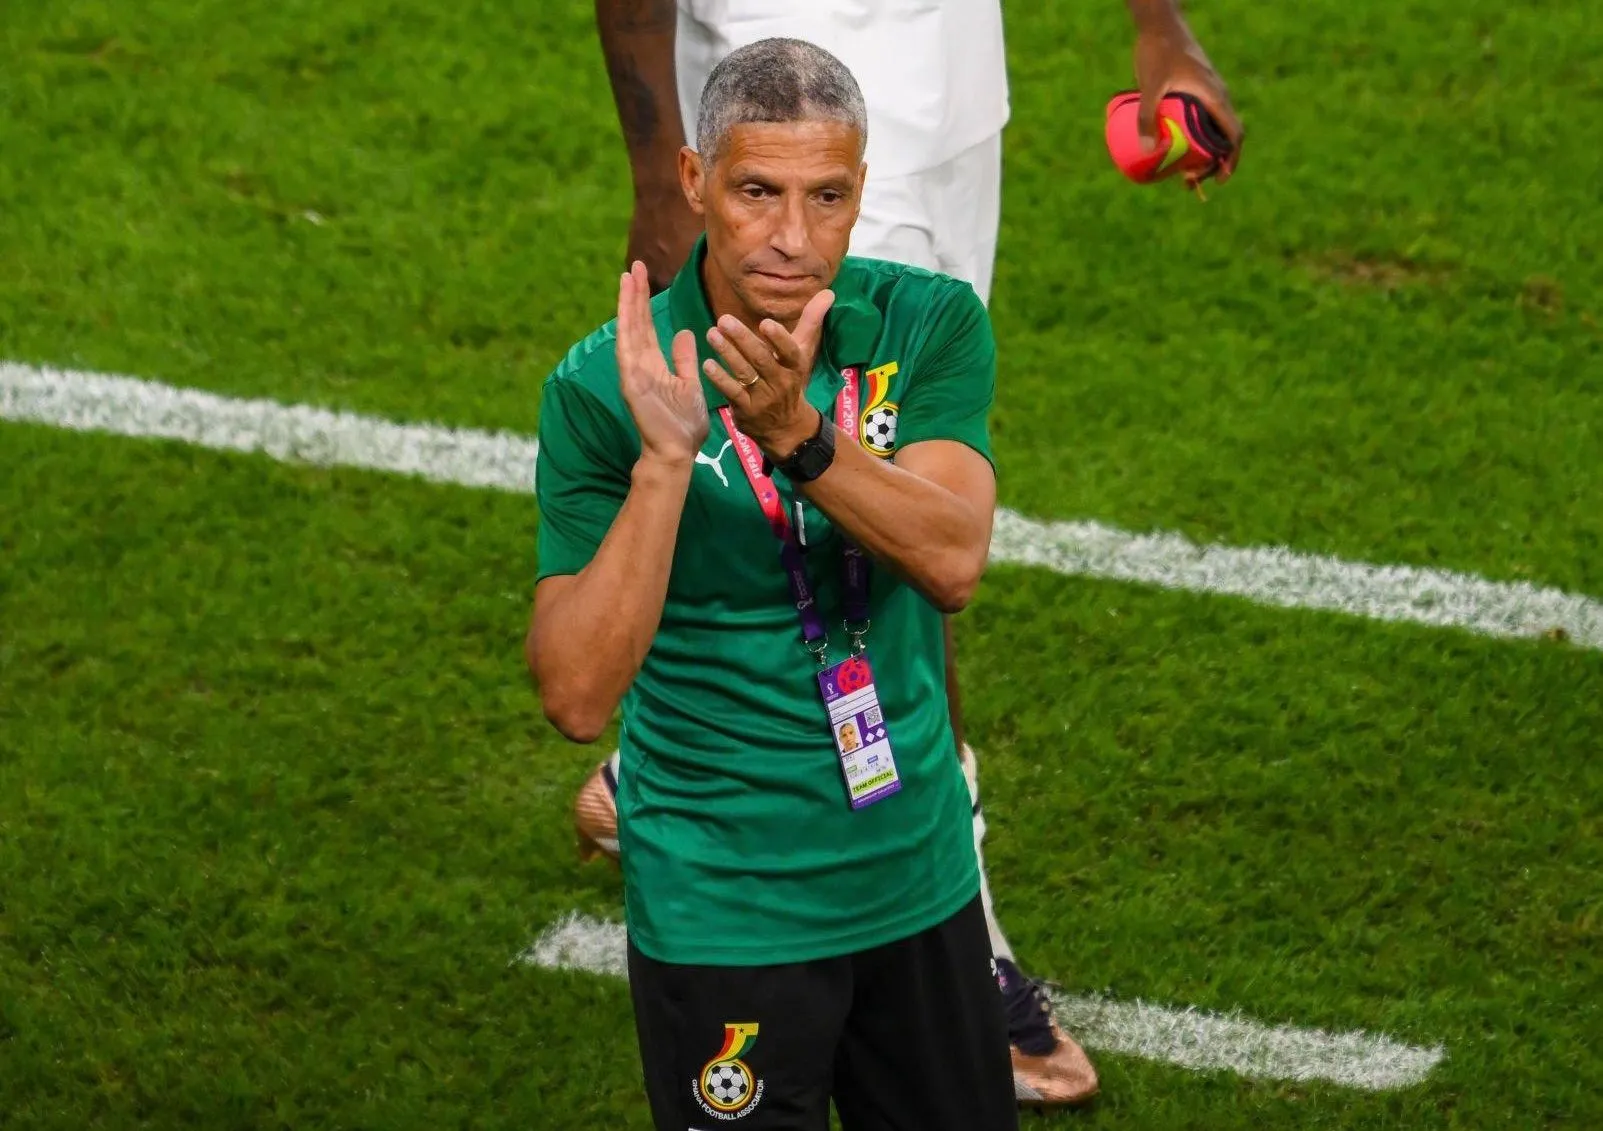 My immediate focus is qualifying Ghana for Afcon - Chris Hughton